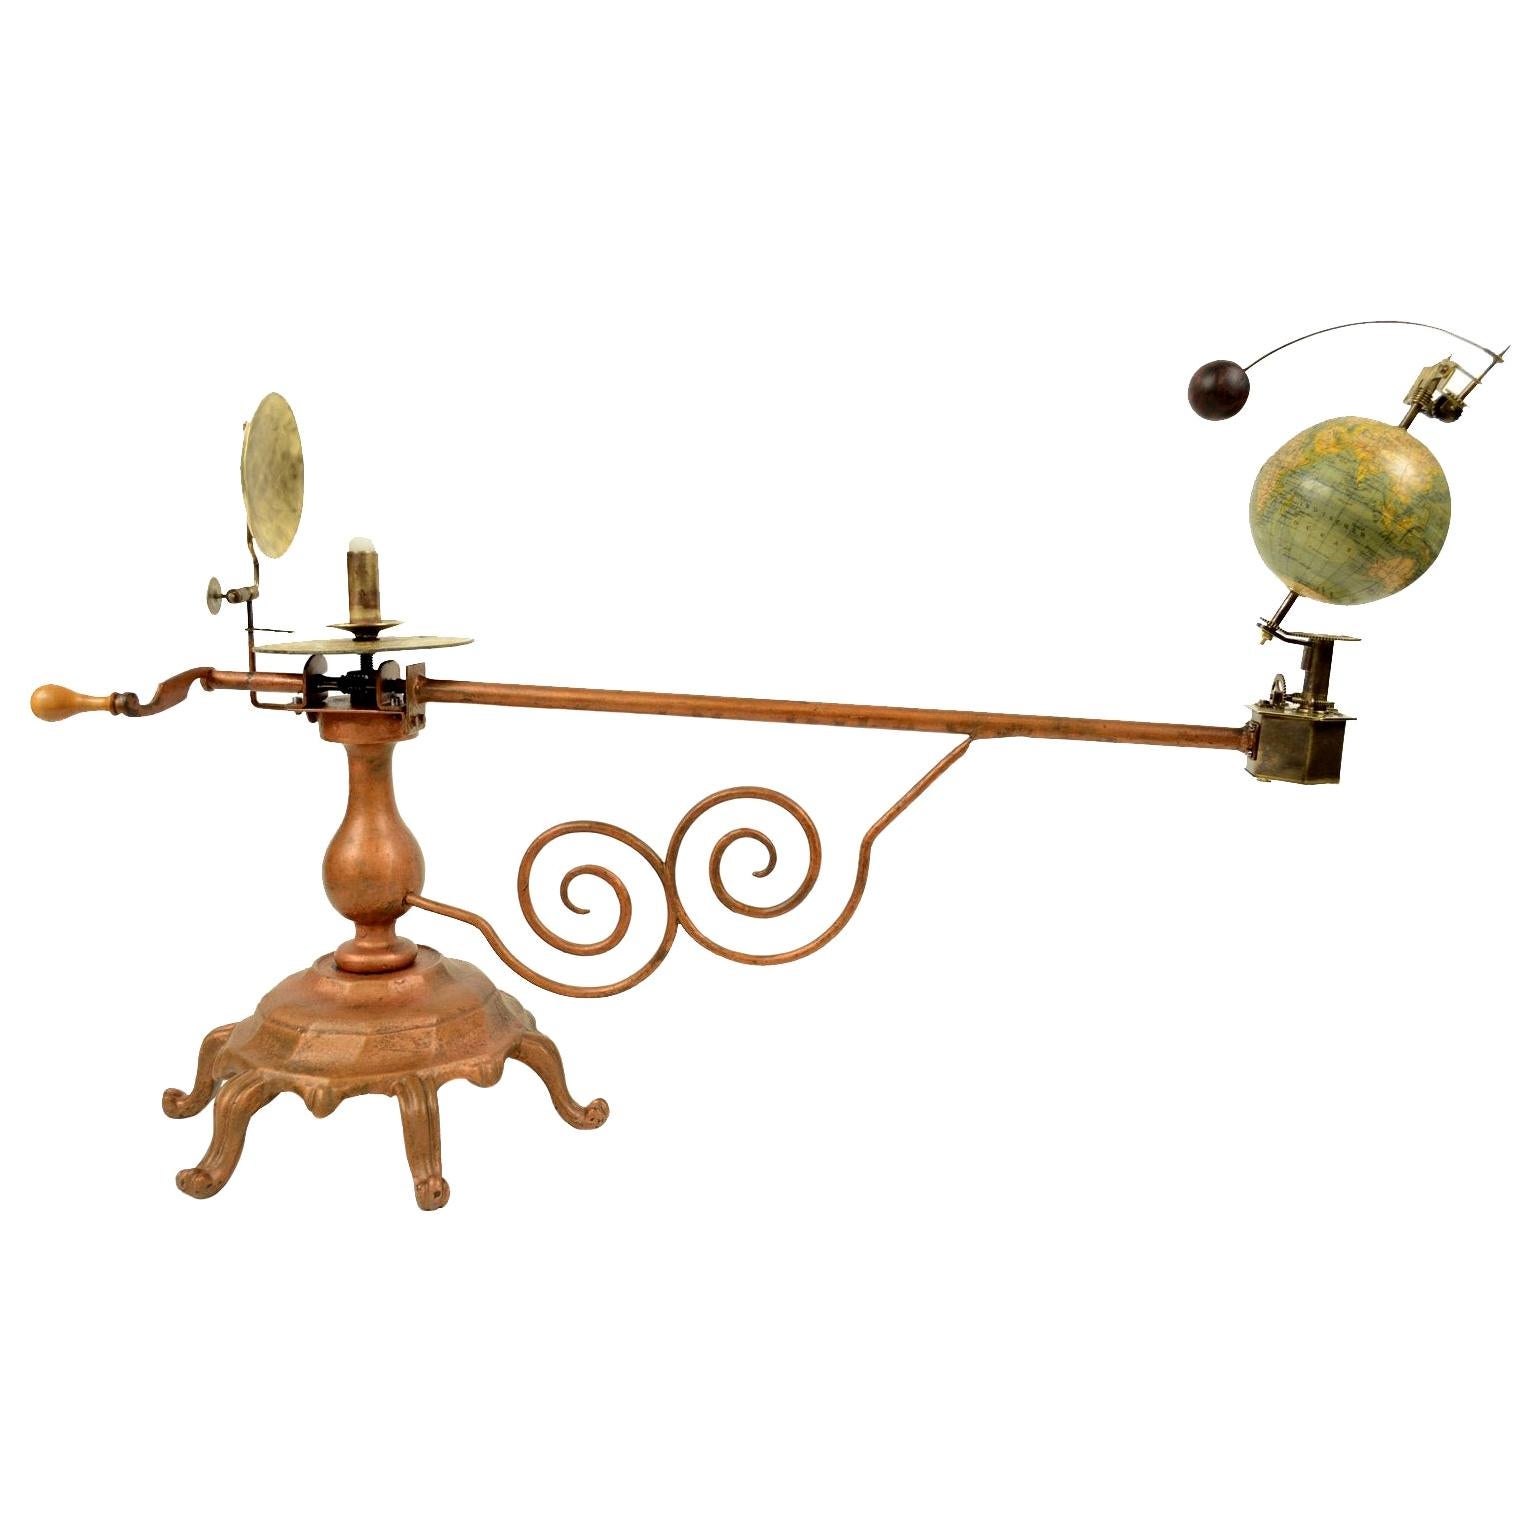 Antique brass orrery planetarium made for the German market by Jan Felkl Prag in the second half of the nineteenth century. Cast iron base, papier mâché´ globe, with detailed territorial map and oceanic currents. Very good condition. Measures: